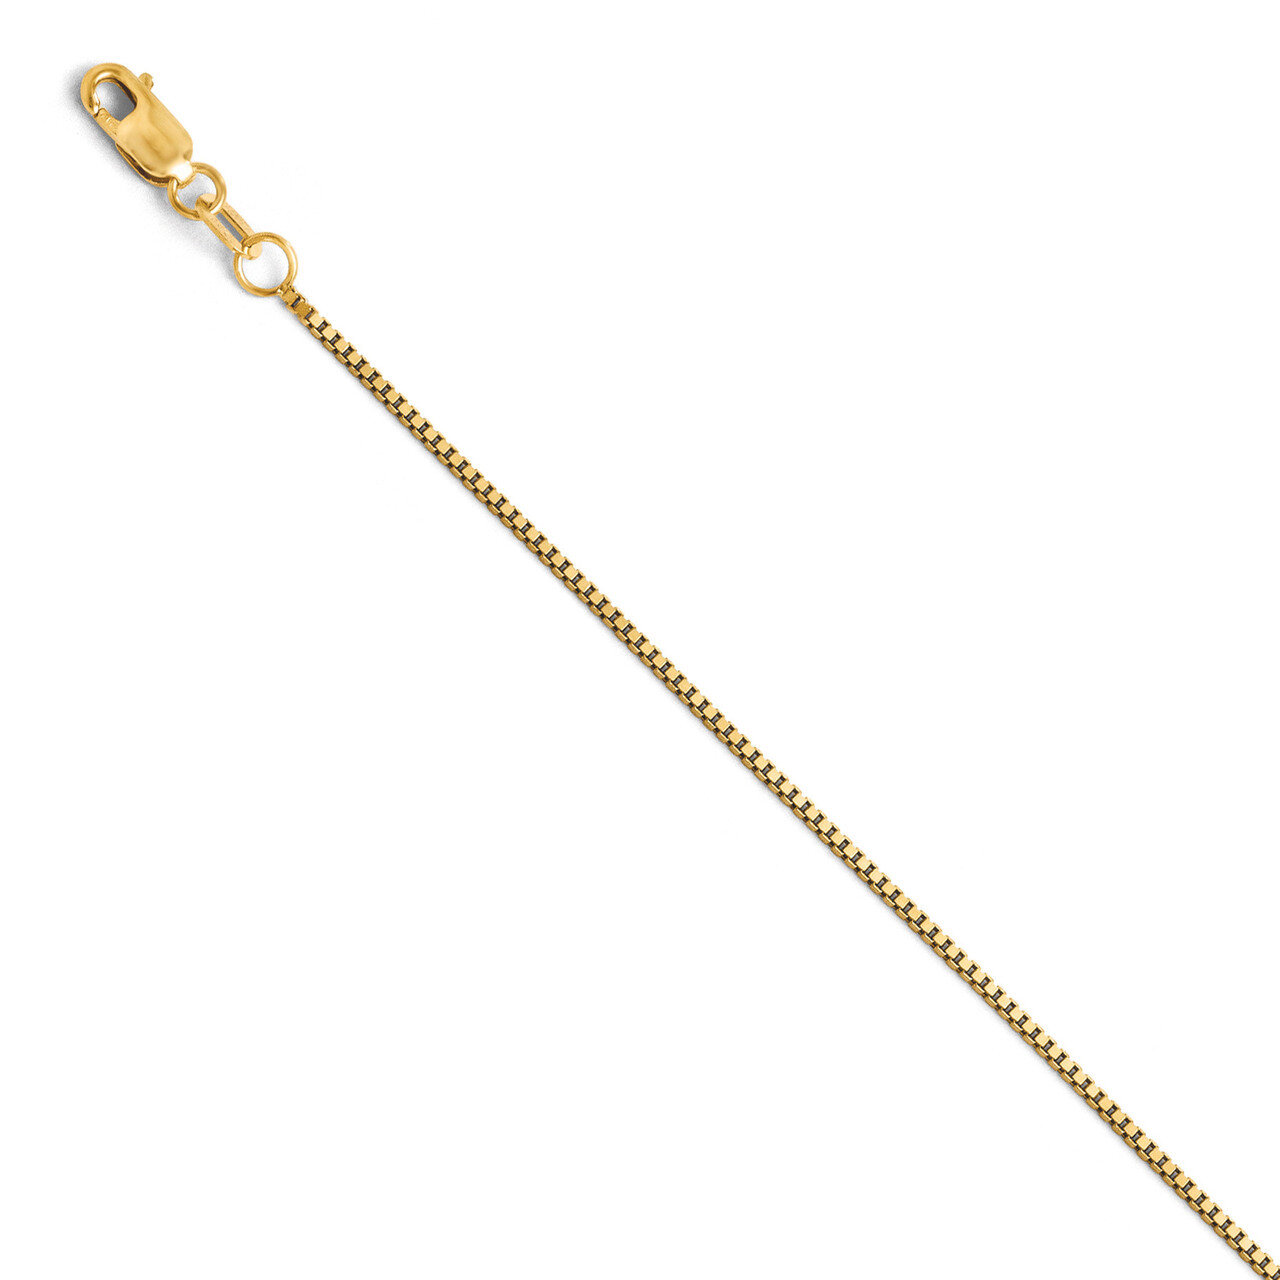 Box with Lobster Chain 18 Inch - 14k Gold HB-1556-18